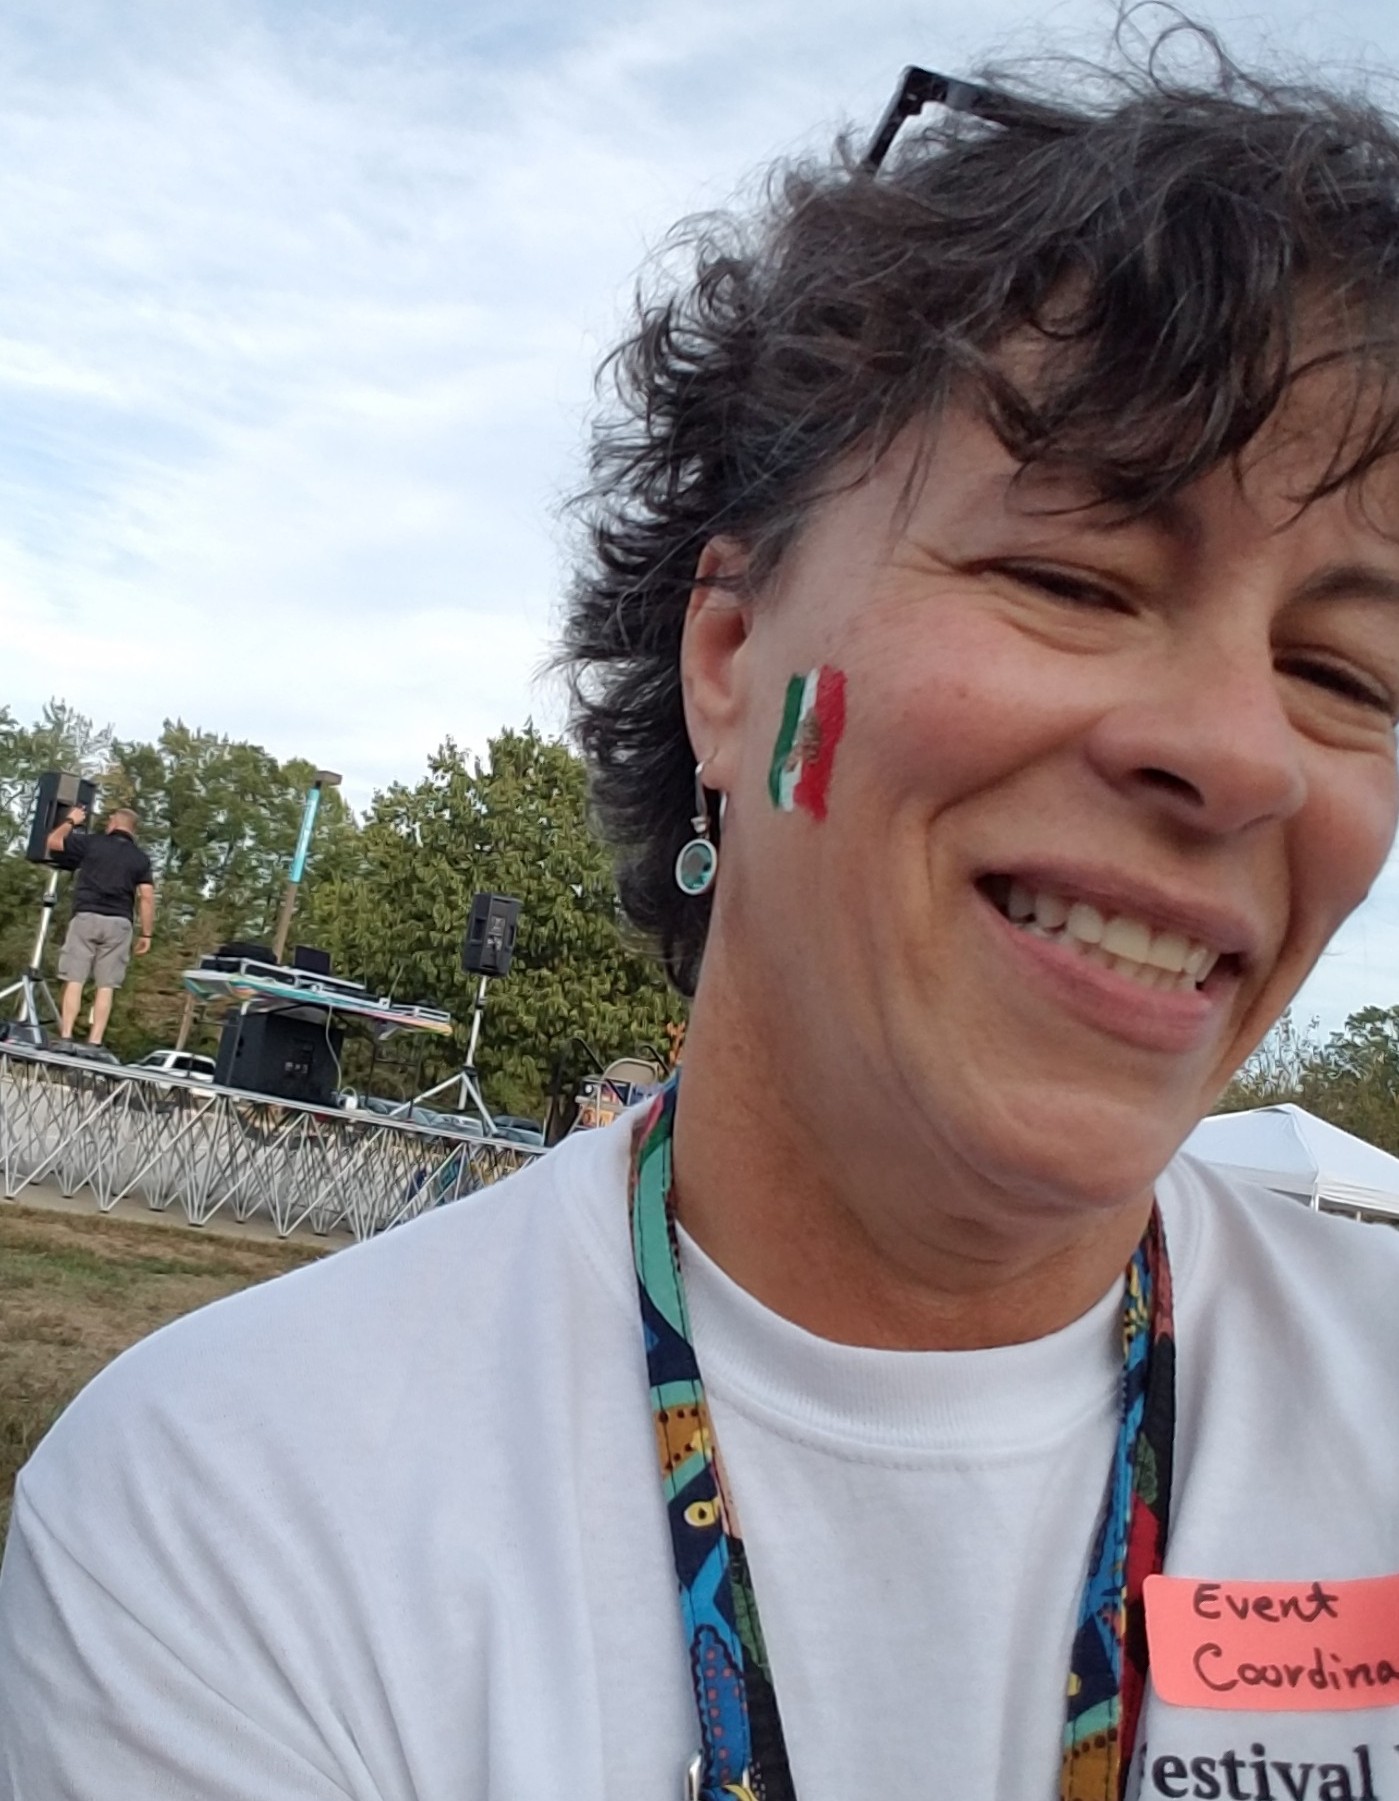 Karen McDonough with the Mexican flag painted on her cheek.